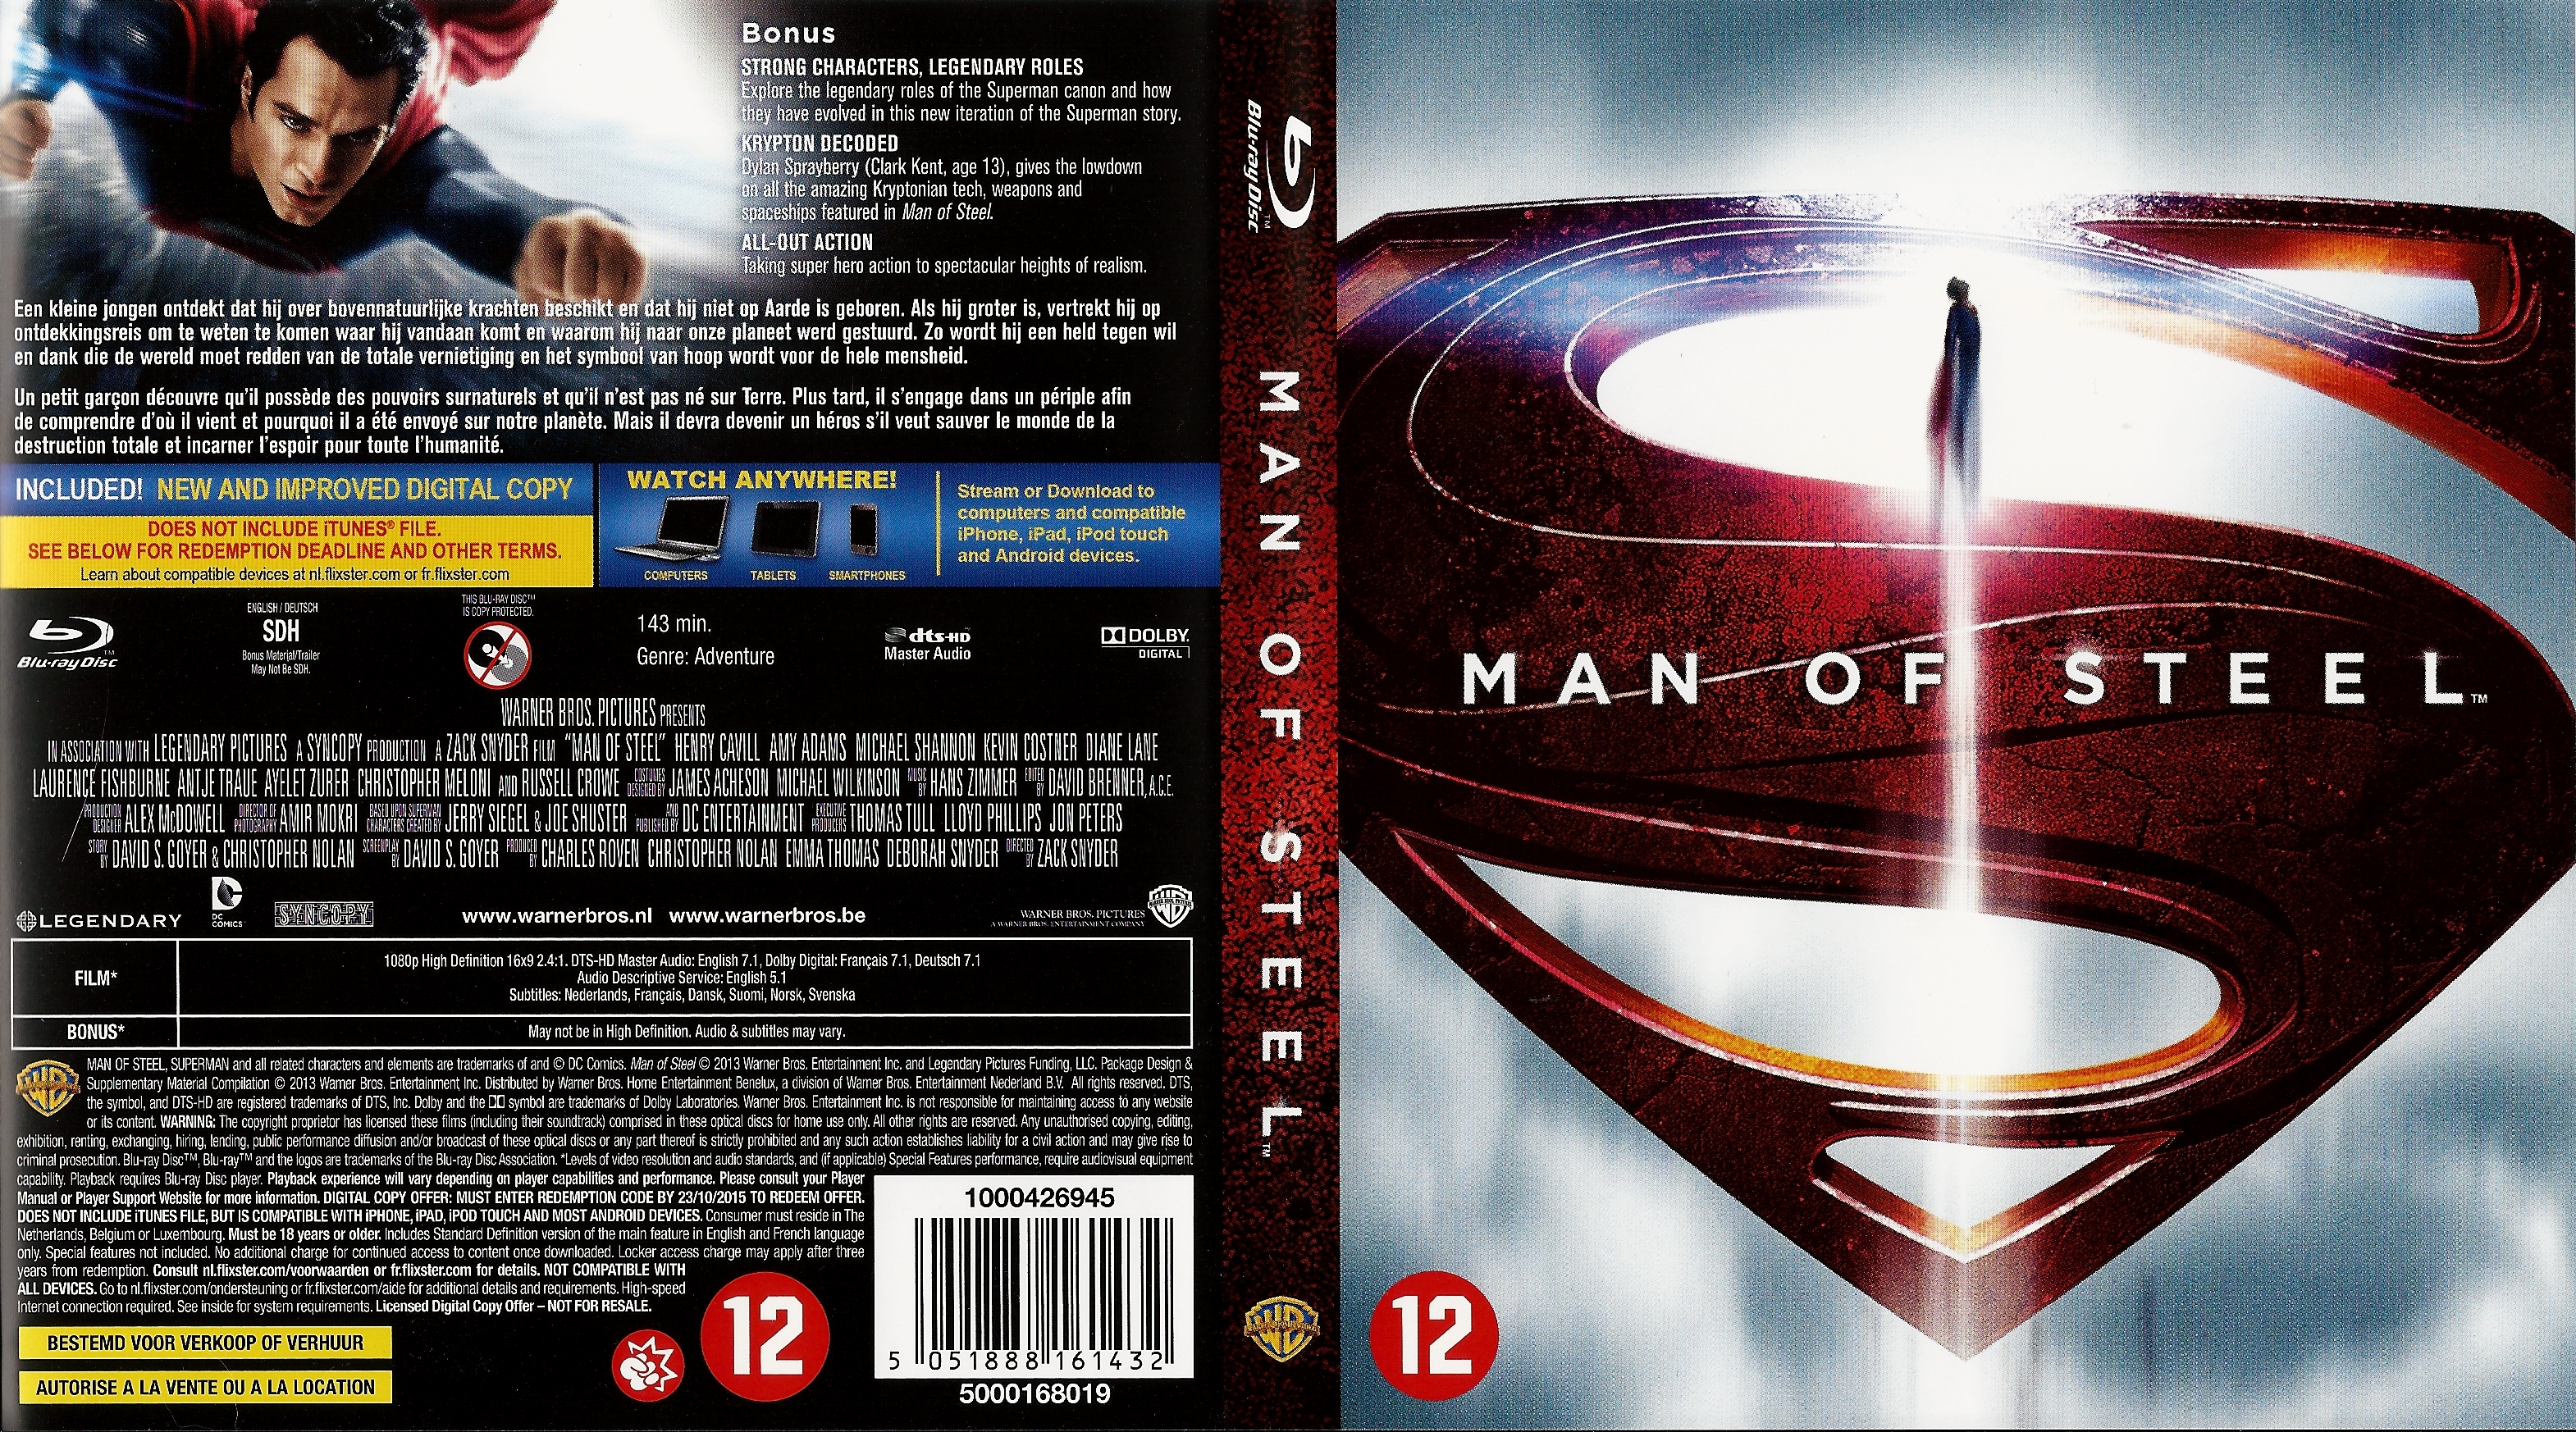 Jaquette DVD Man of Steel (BLU-RAY) v3